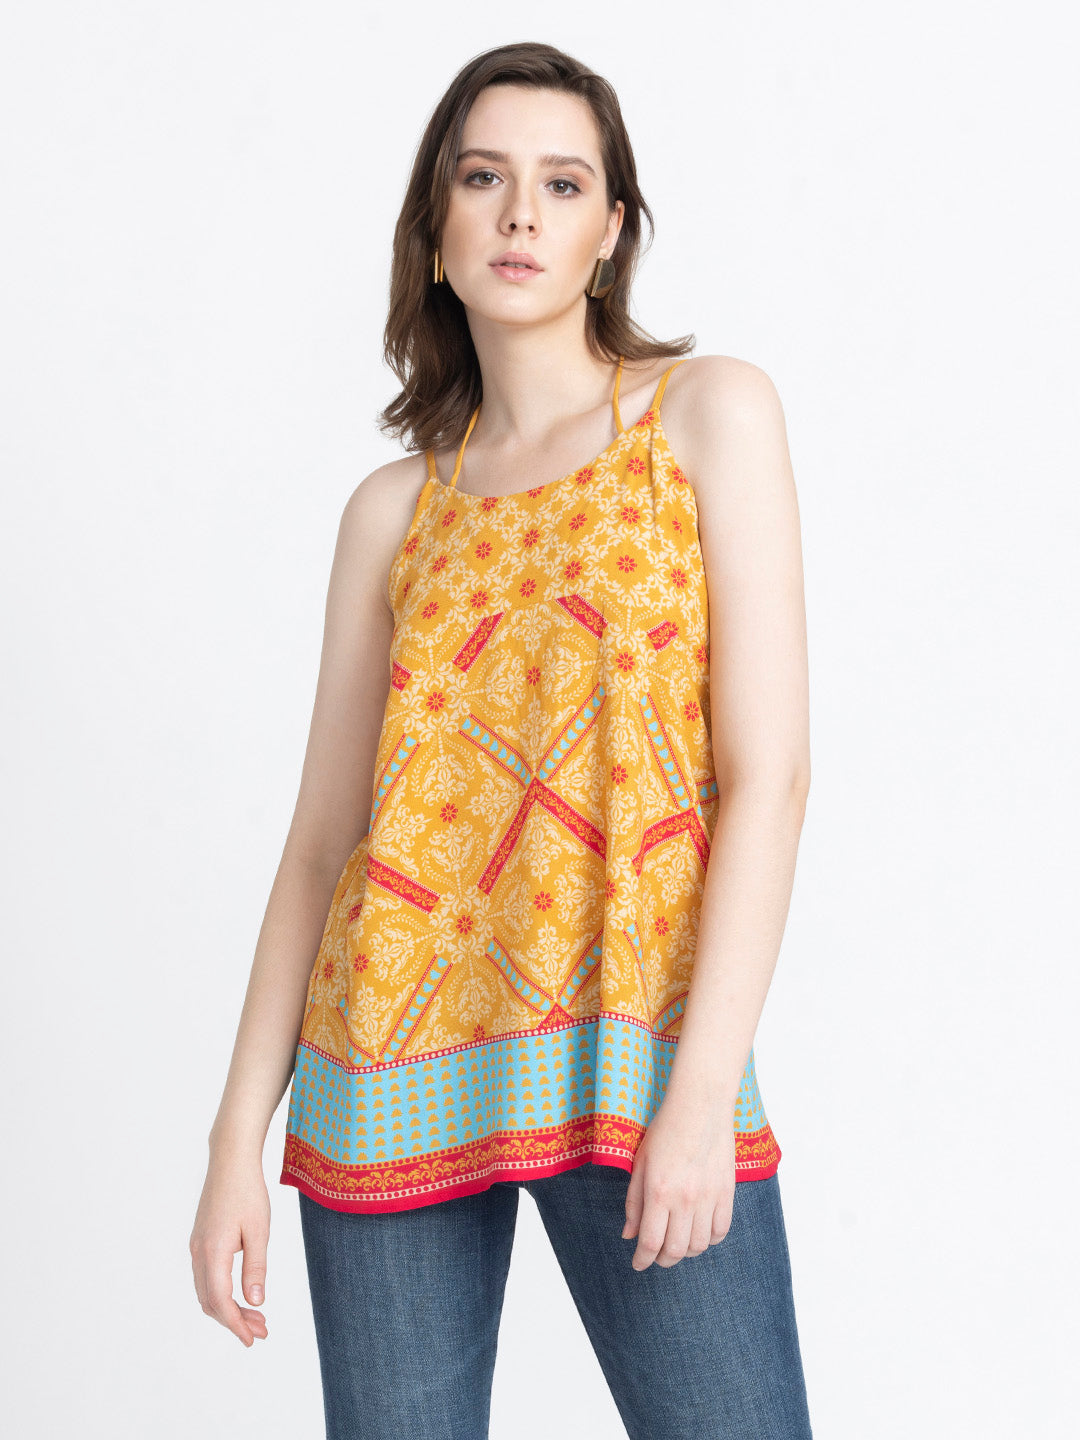 Sunshine Tank Top from Shaye , Top for women